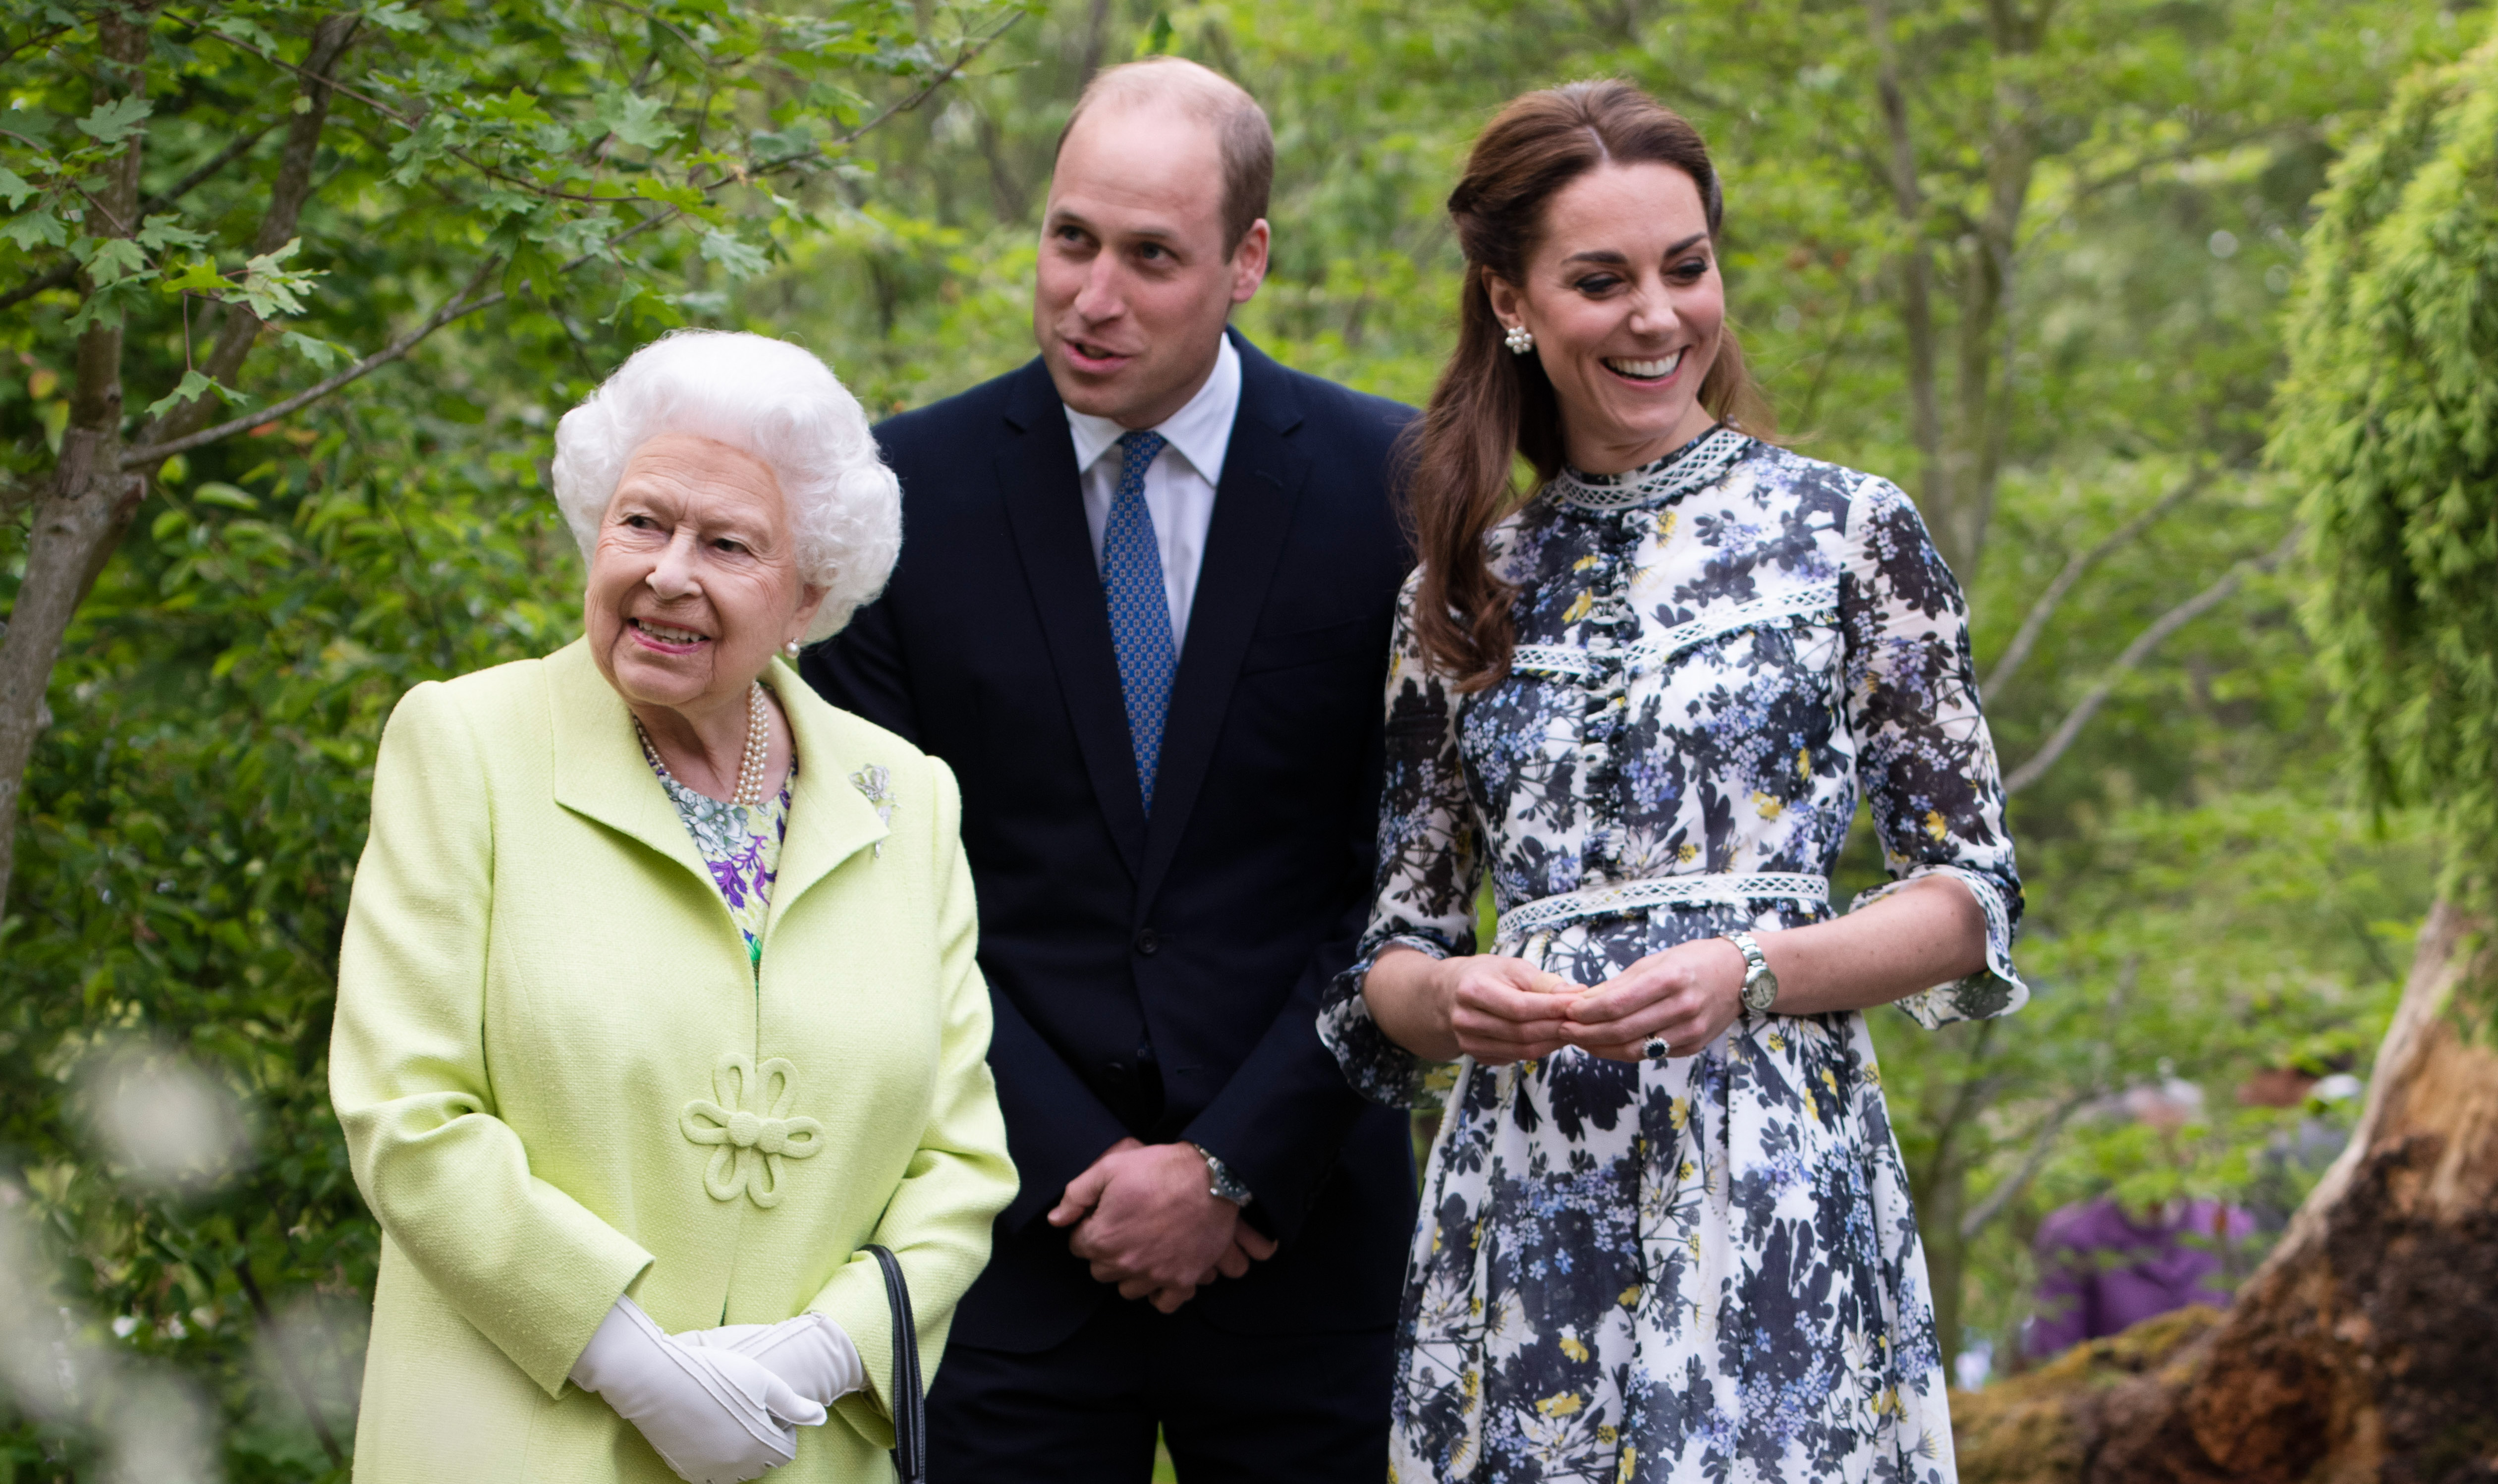 The Queen with The Duke and Duchess of Cambridge in the RHS Back to Nature Garden at the Chelsea Flower Show